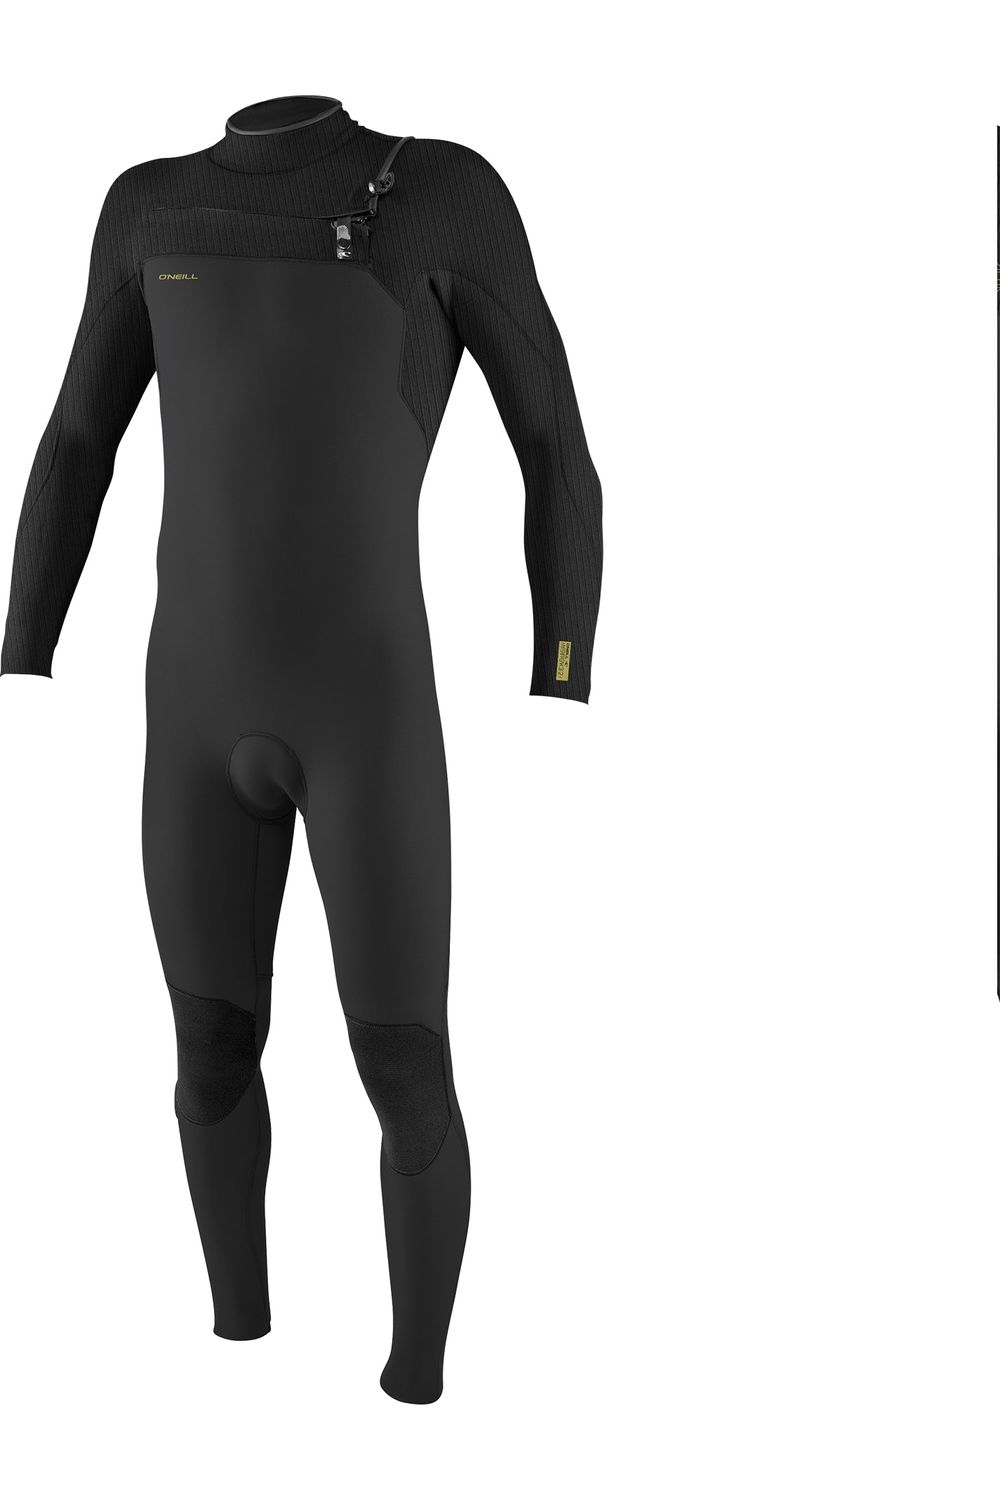 O'Neill Hyperfreak 5/4+ Wetsuit With Chest Zip In Raven Black